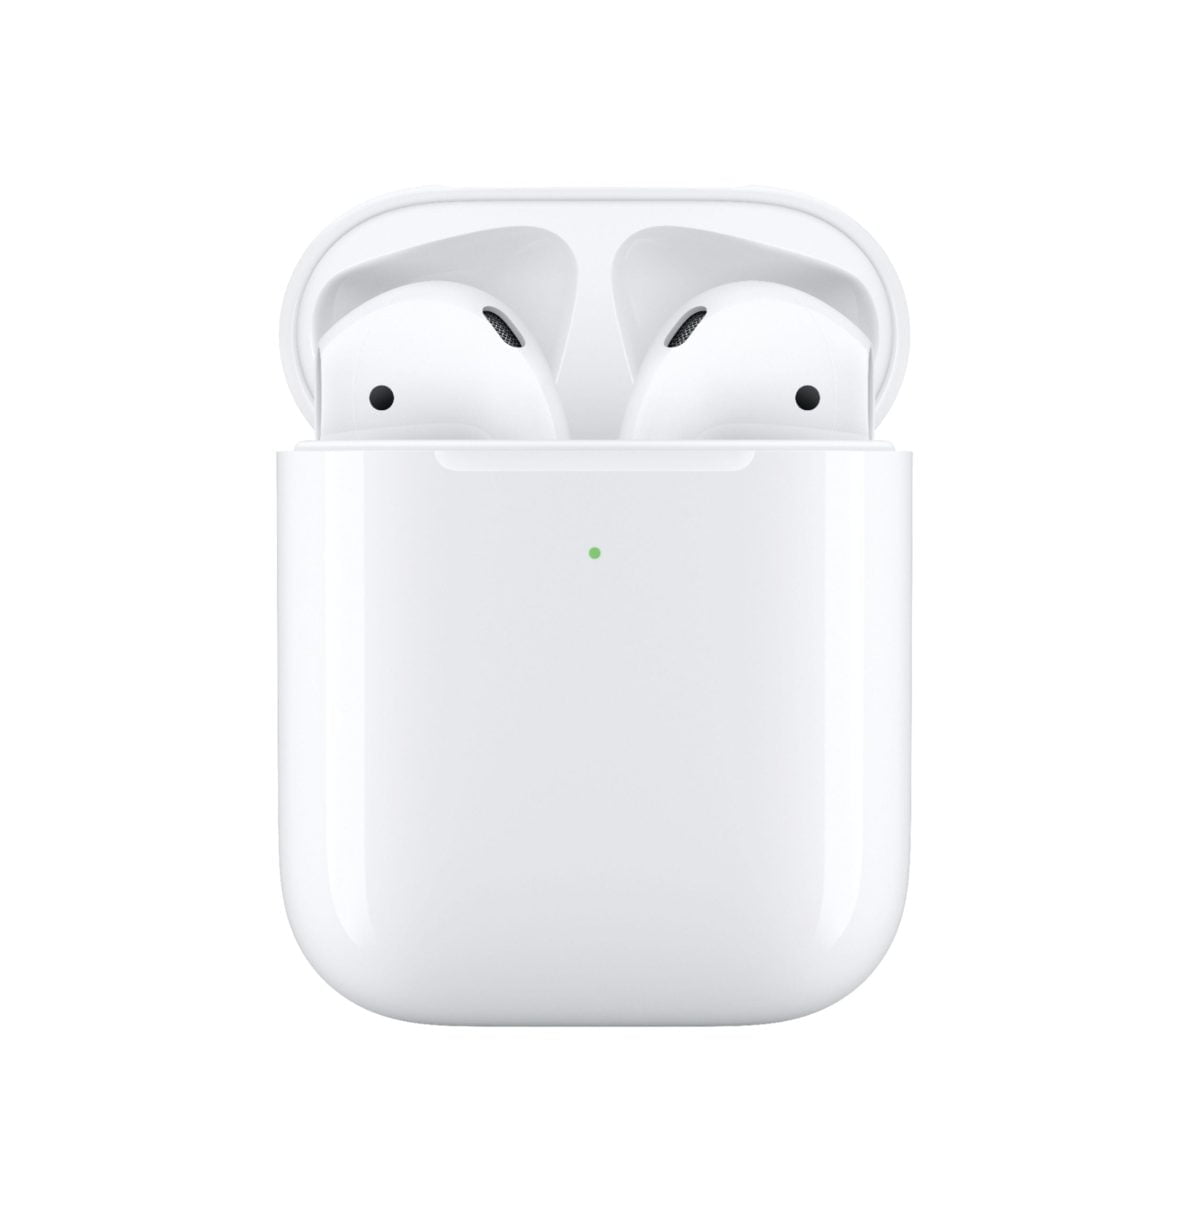 6083595Cv12D Scaled Apple &Lt;Div&Gt; &Lt;H1&Gt;Apple Airpods With Wireless Charging Case - White Model Mrxj2Am/A&Lt;/H1&Gt; &Lt;Div&Gt;Airpods Combine Intelligent Design With Breakthrough Technology And Crystal-Clear Sound. Powered By The New Apple H1 Headphone Chip, Airpods Now Feature Hands-Free Access To Siri Using Just Your Voice. And Up To 3 Hours Of Talk Time On A Single Charge.&Lt;/Div&Gt; &Lt;/Div&Gt; &Lt;Div&Gt; &Lt;Div Class=&Quot;List-Row&Quot;&Gt; &Lt;Ul&Gt; &Lt;Li Class=&Quot;Body-Copy&Quot;&Gt;Automatically On, Automatically Connected&Lt;/Li&Gt; &Lt;Li Class=&Quot;Body-Copy&Quot;&Gt;Easy Setup For All Your Apple Devices&Lt;/Li&Gt; &Lt;Li Class=&Quot;Body-Copy&Quot;&Gt;Quick Access To Siri By Saying, Hey Siri&Lt;/Li&Gt; &Lt;Li Class=&Quot;Body-Copy&Quot;&Gt;Double-Tap To Play Or Skip Forward&Lt;/Li&Gt; &Lt;Li Class=&Quot;Body-Copy&Quot;&Gt;New Apple H1 Headphone Chip Delivers A Faster Wireless Connection To Your Devices&Lt;/Li&Gt; &Lt;Li Class=&Quot;Body-Copy&Quot;&Gt;Charges Quickly In The Case&Lt;/Li&Gt; &Lt;Li Class=&Quot;Body-Copy&Quot;&Gt;Case Can Be Charged Using The Lightning Connector&Lt;/Li&Gt; &Lt;Li Class=&Quot;Body-Copy&Quot;&Gt;Rich, High-Quality Audio And Voice&Lt;/Li&Gt; &Lt;Li Class=&Quot;Body-Copy&Quot;&Gt;Seamless Switching Between Devices&Lt;/Li&Gt; &Lt;Li Class=&Quot;Body-Copy&Quot;&Gt;Listen And Talk All Day With Multiple Charges From The Charging Case&Lt;/Li&Gt; &Lt;/Ul&Gt; &Lt;/Div&Gt; &Lt;Div Class=&Quot;List-Row&Quot;&Gt;&Lt;/Div&Gt; &Lt;Div Class=&Quot;List-Row&Quot;&Gt; &Lt;P Class=&Quot;Body-Copy&Quot;&Gt;&Lt;Span Style=&Quot;Font-Family: Consolas, Monaco, Monospace&Quot;&Gt;One Year Apple Warranty&Lt;/Span&Gt;&Lt;/P&Gt; &Lt;/Div&Gt; &Lt;/Div&Gt; Apple Airpods Apple Airpods With Wireless Charging Case - White Model Mrxj2Am/A